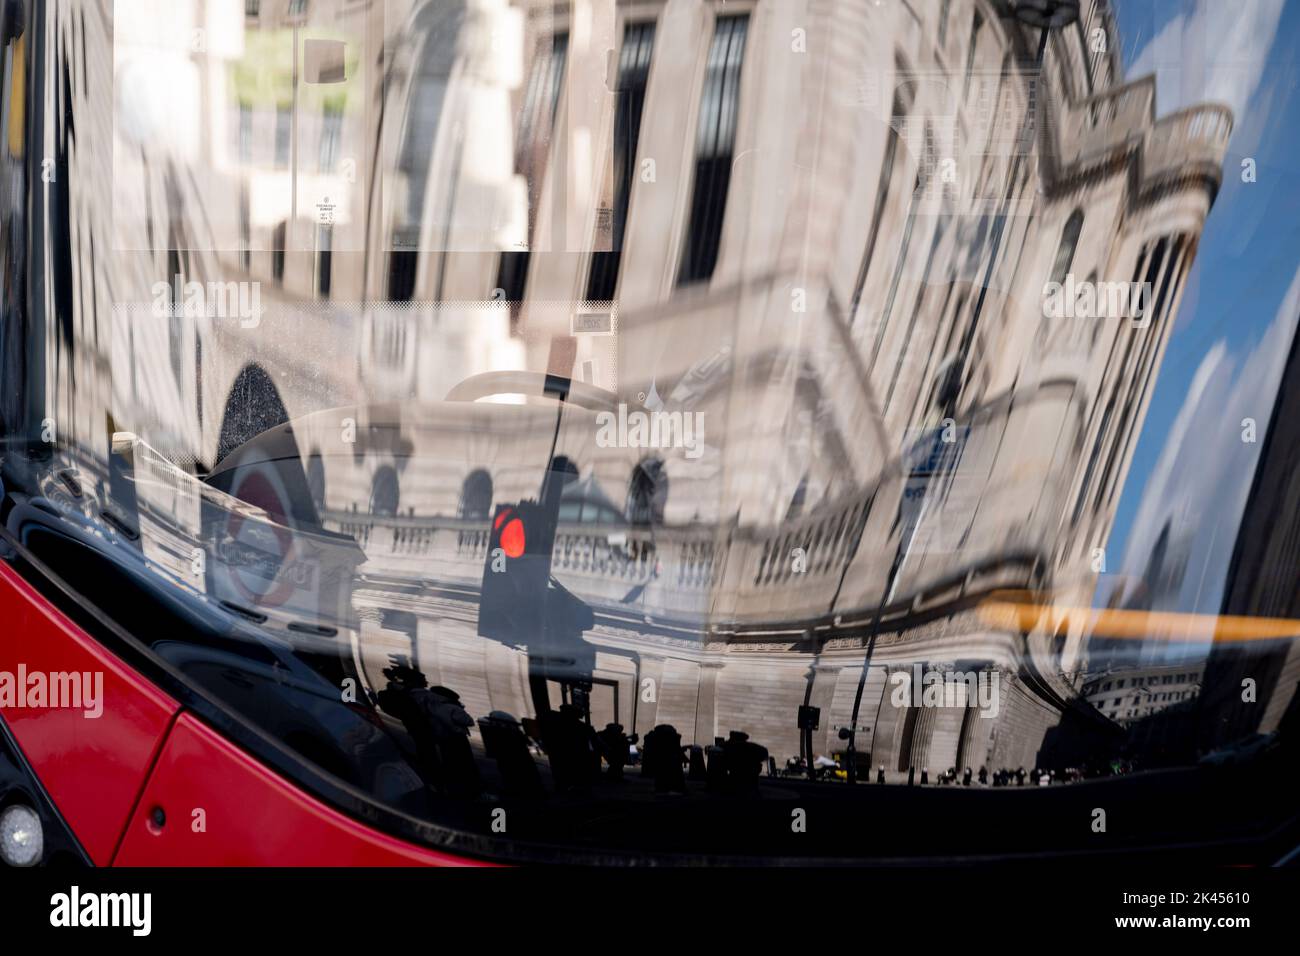 The Bank of England is seen reflected in the windscreen of a bus during Prime Minister Liz Truss and her Chancellor Kwasi Kwarteng's economic crisis, in the City of London, the capital's financial district, on 29th September 2022, in the City of London, England. Stock Photo